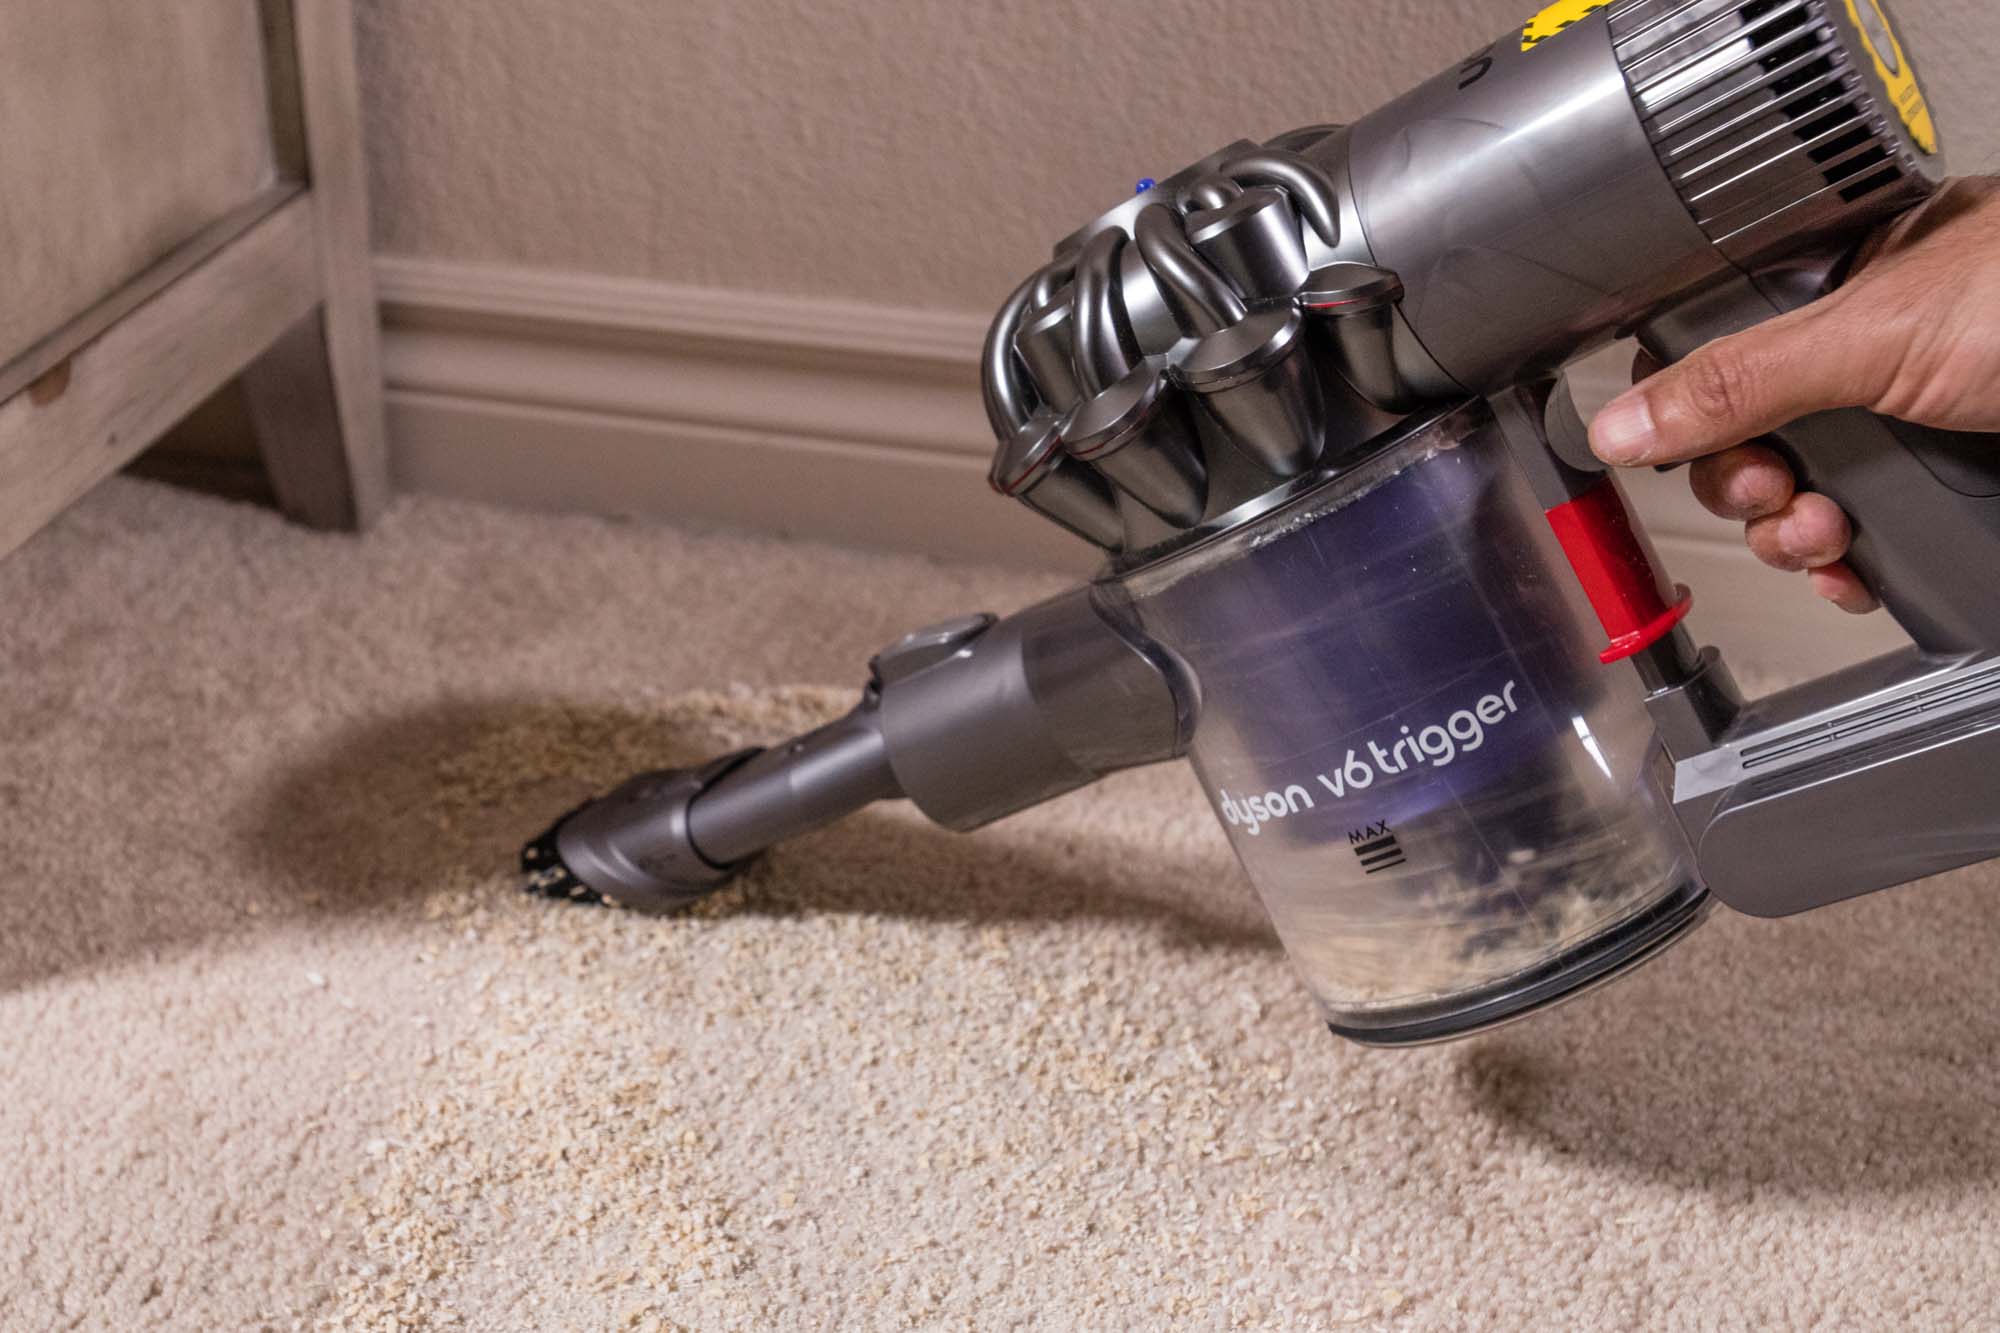 The Best Handheld Vacuums - Reviews by Your Best